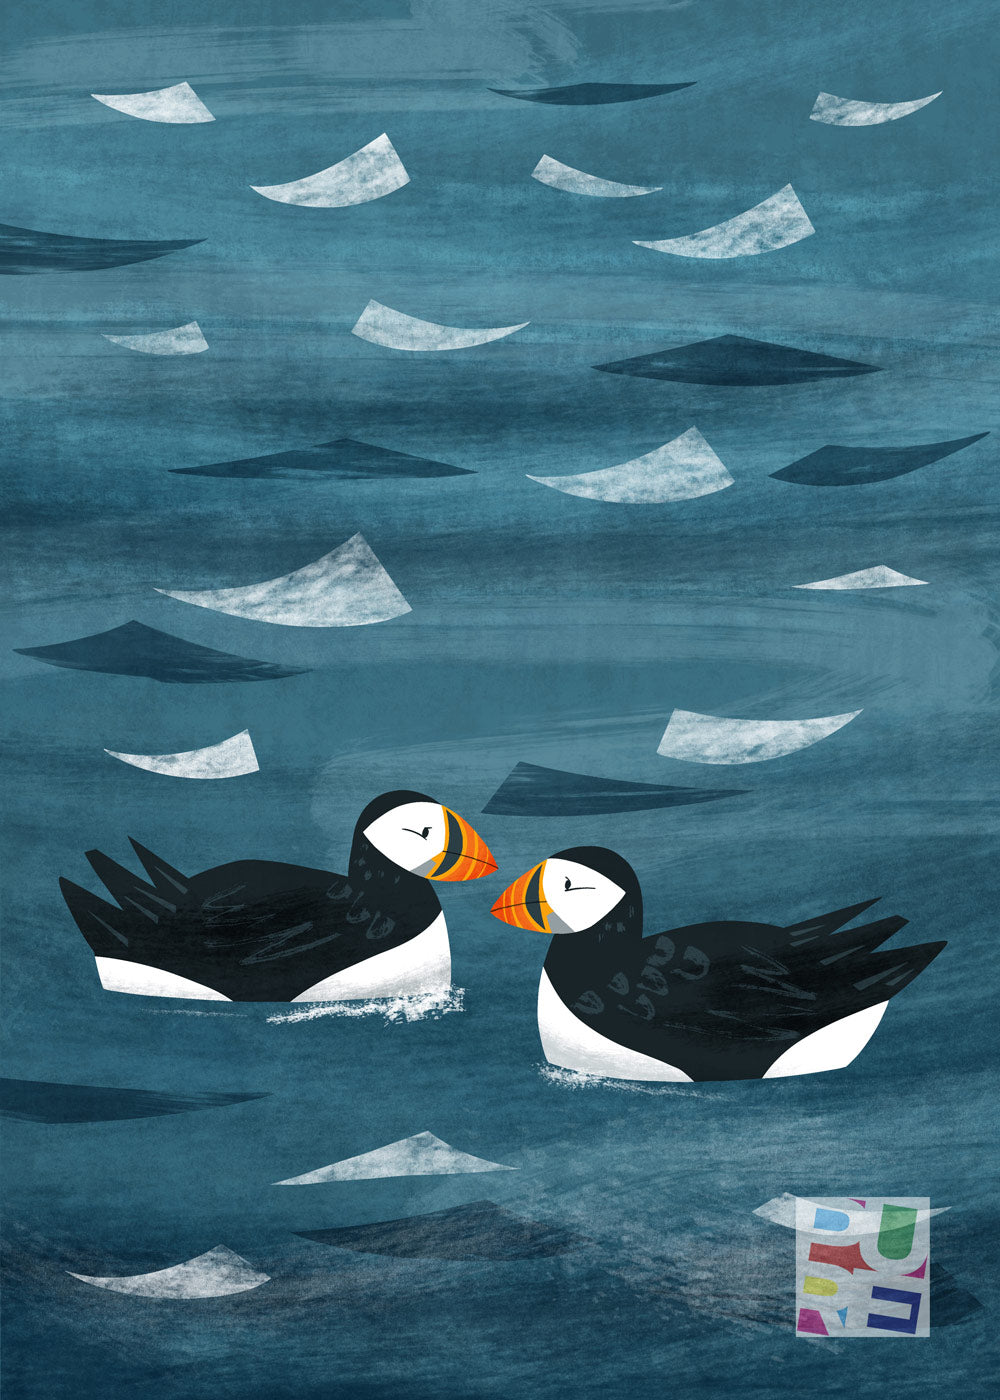 Ornithology illustration of Puffins by Cornwall artist Holly Astle represented by Pure Art Licensing & Illustration Agency